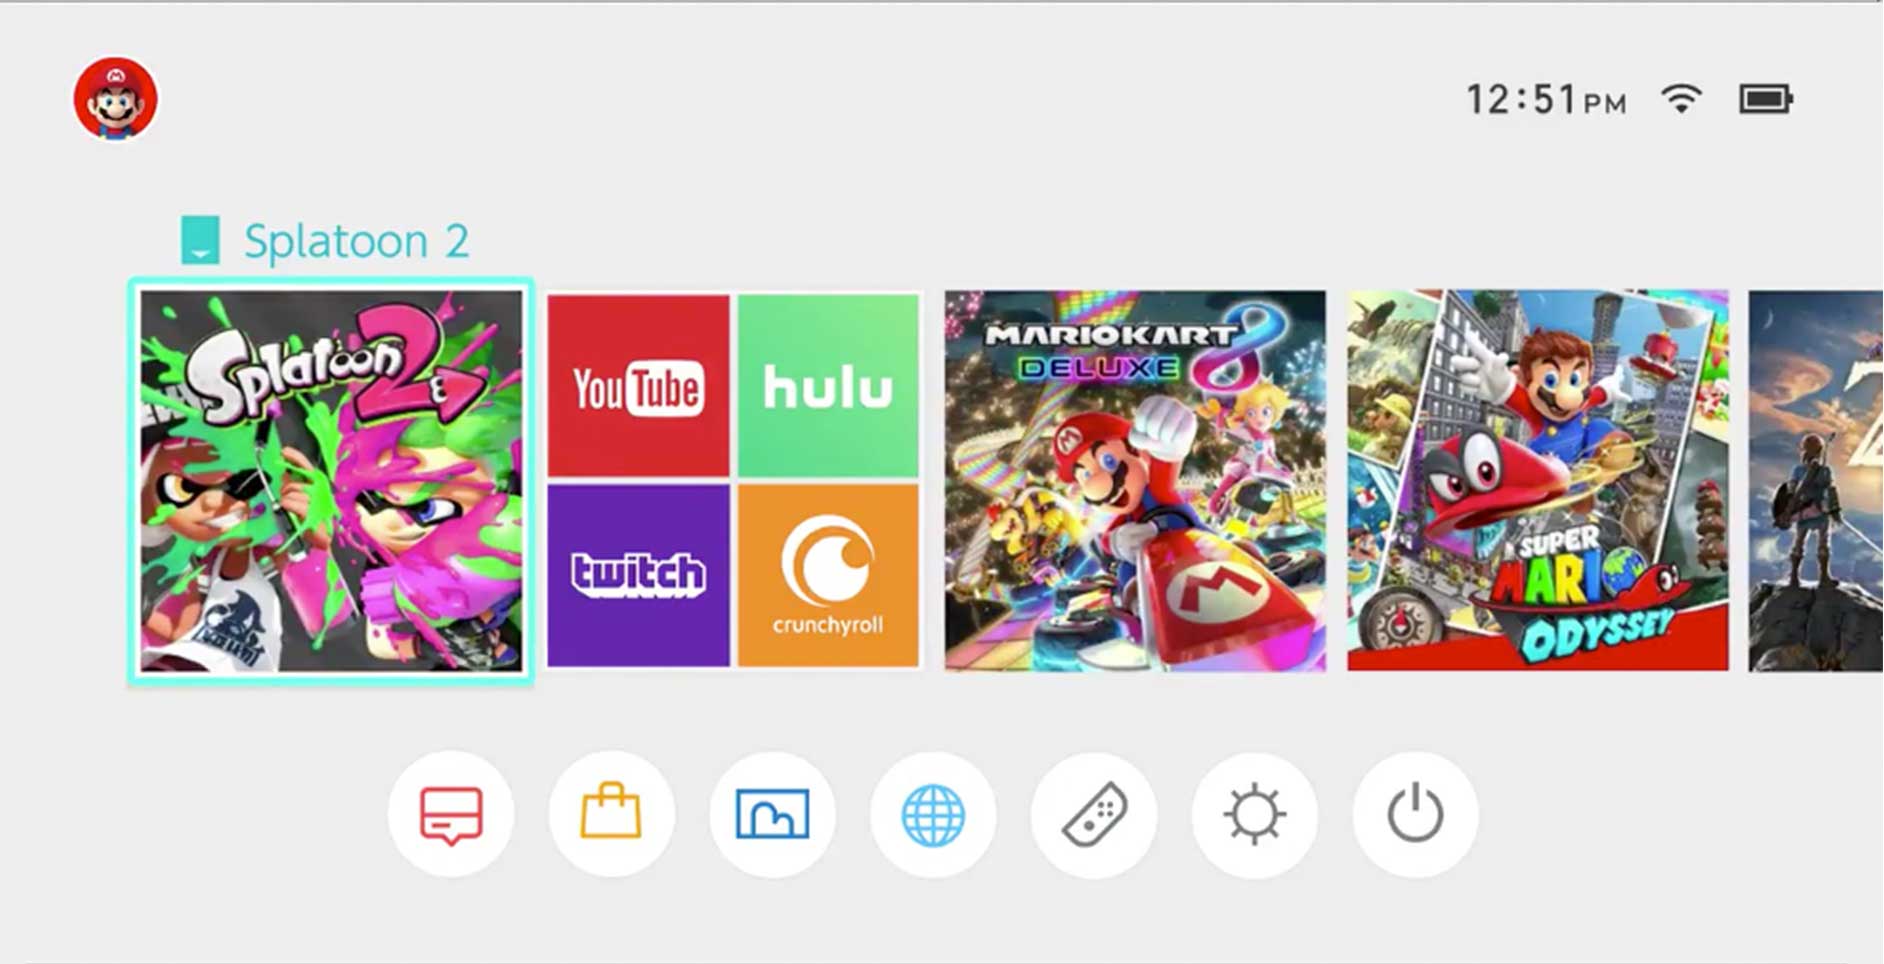 is crunchyroll on the switch